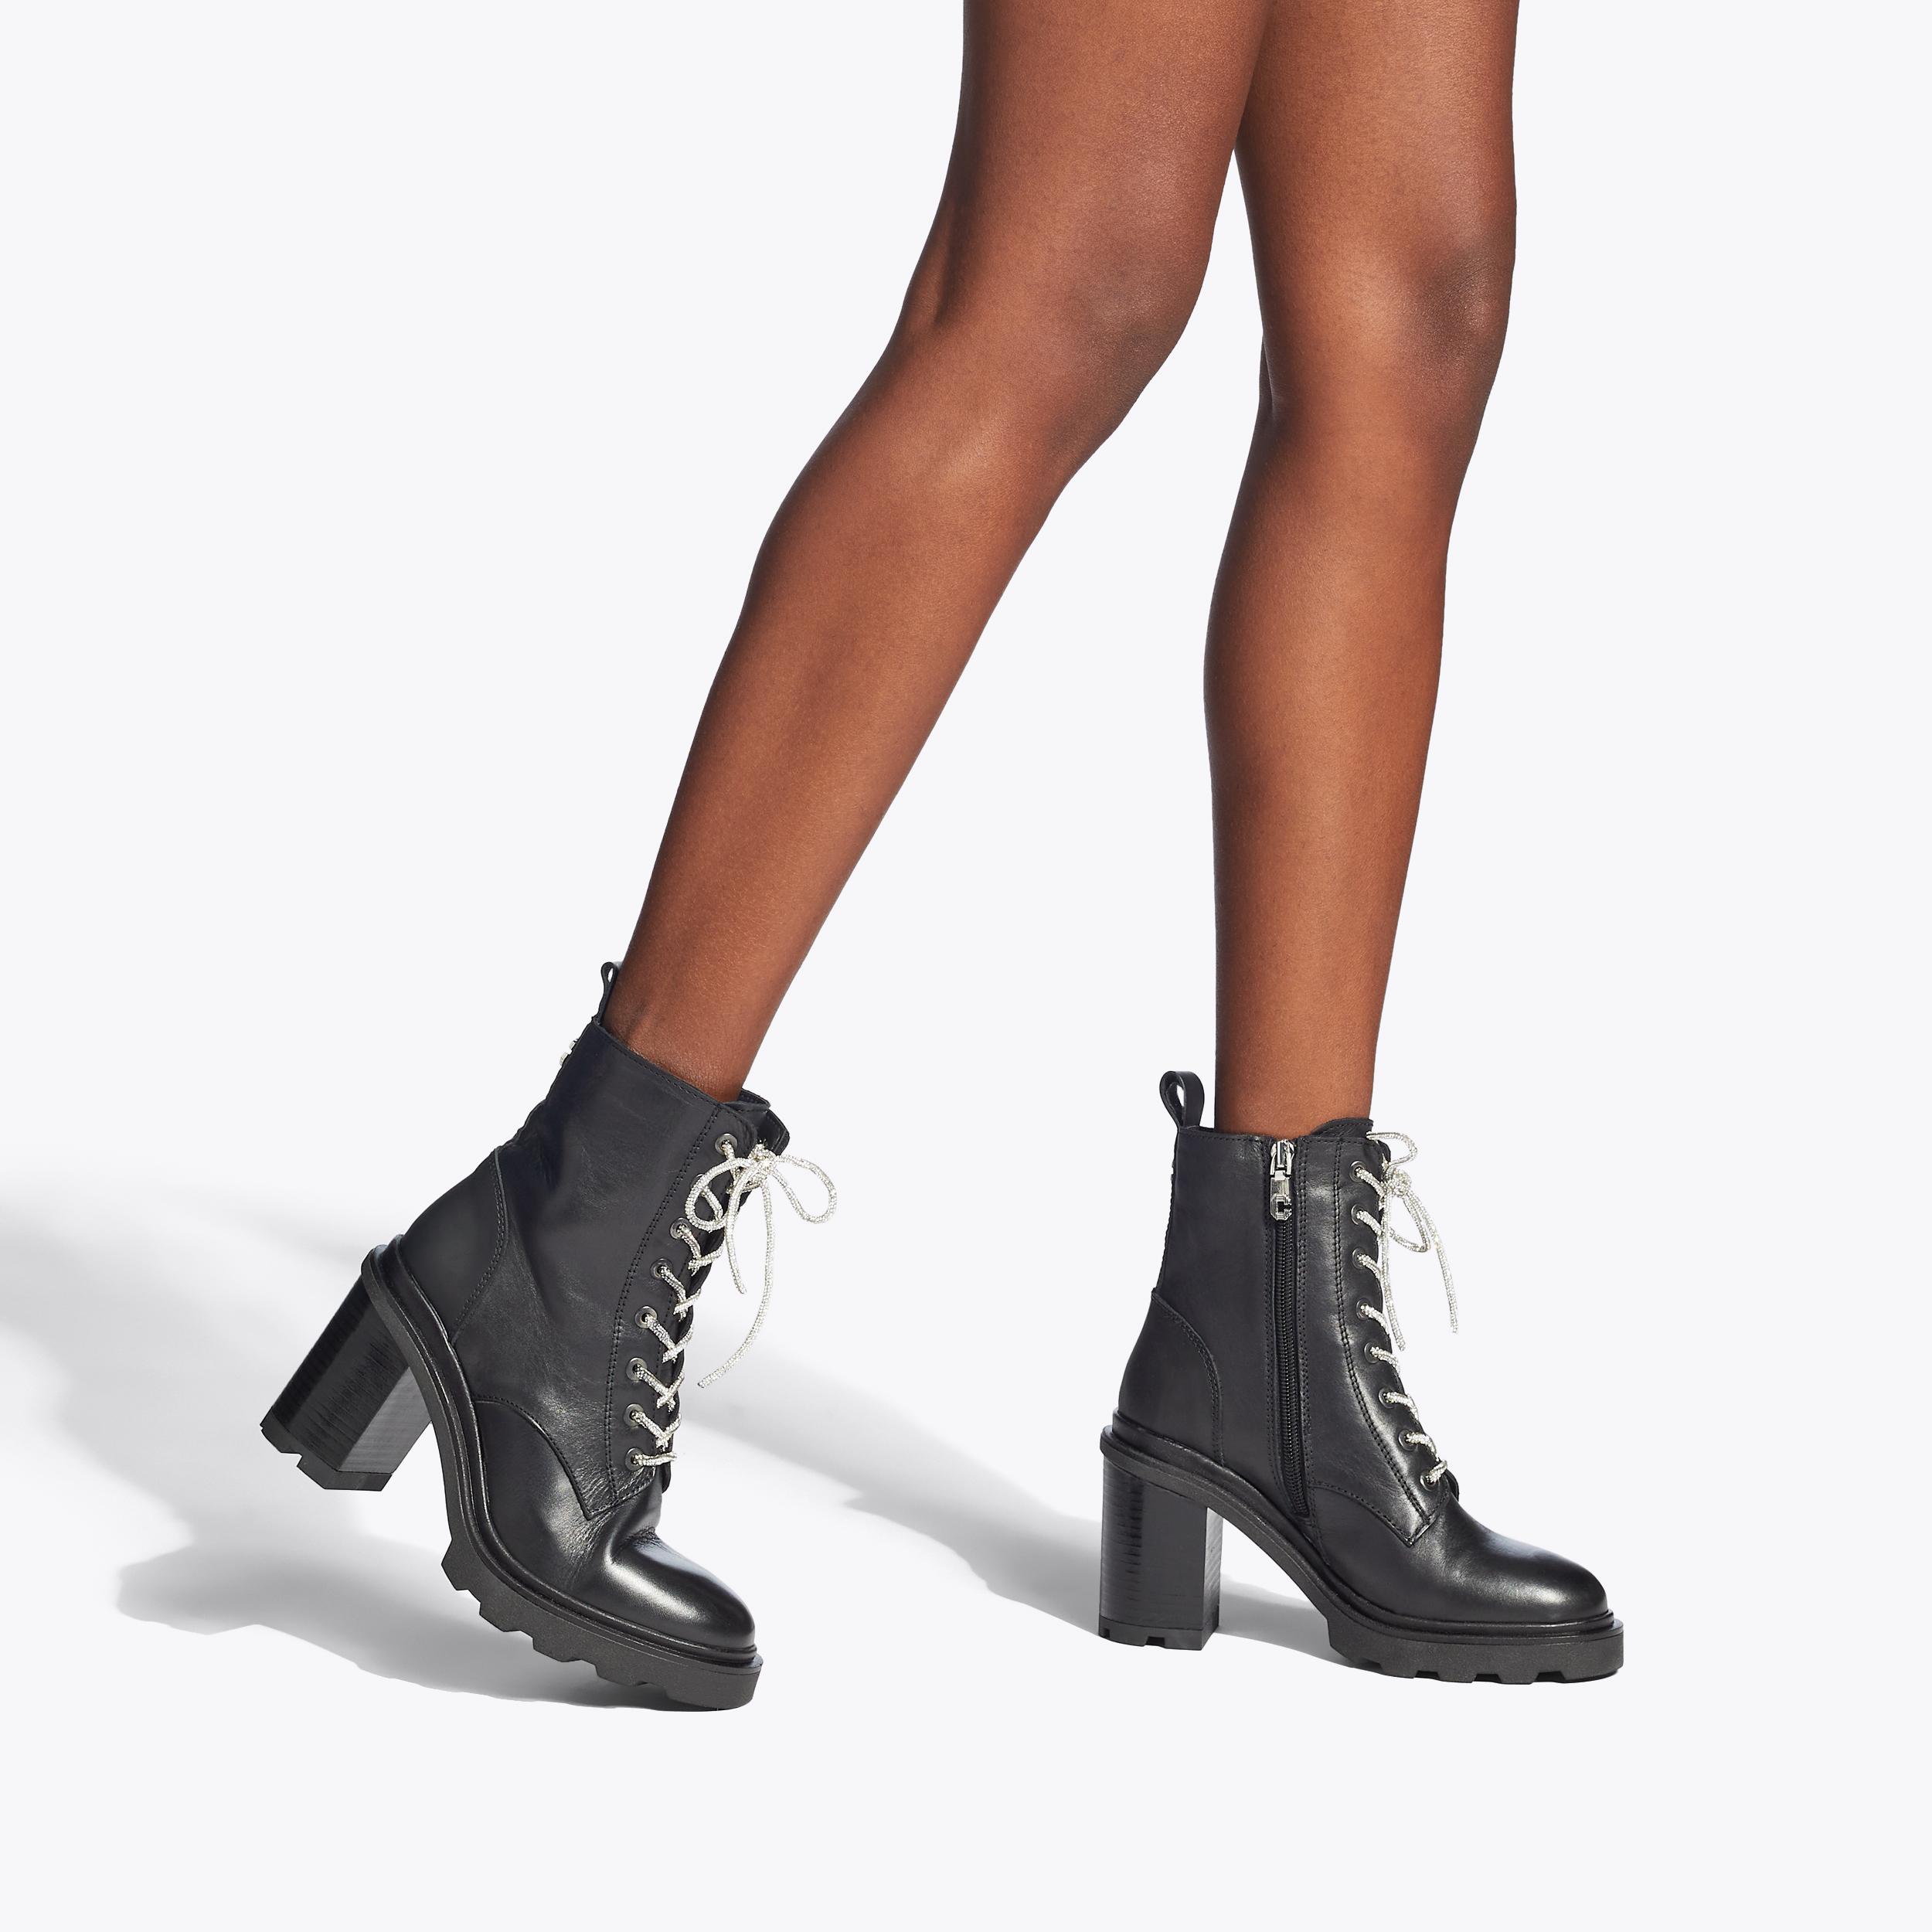 INFINITY Black Leather Heeled Ankle Boot by CARVELA